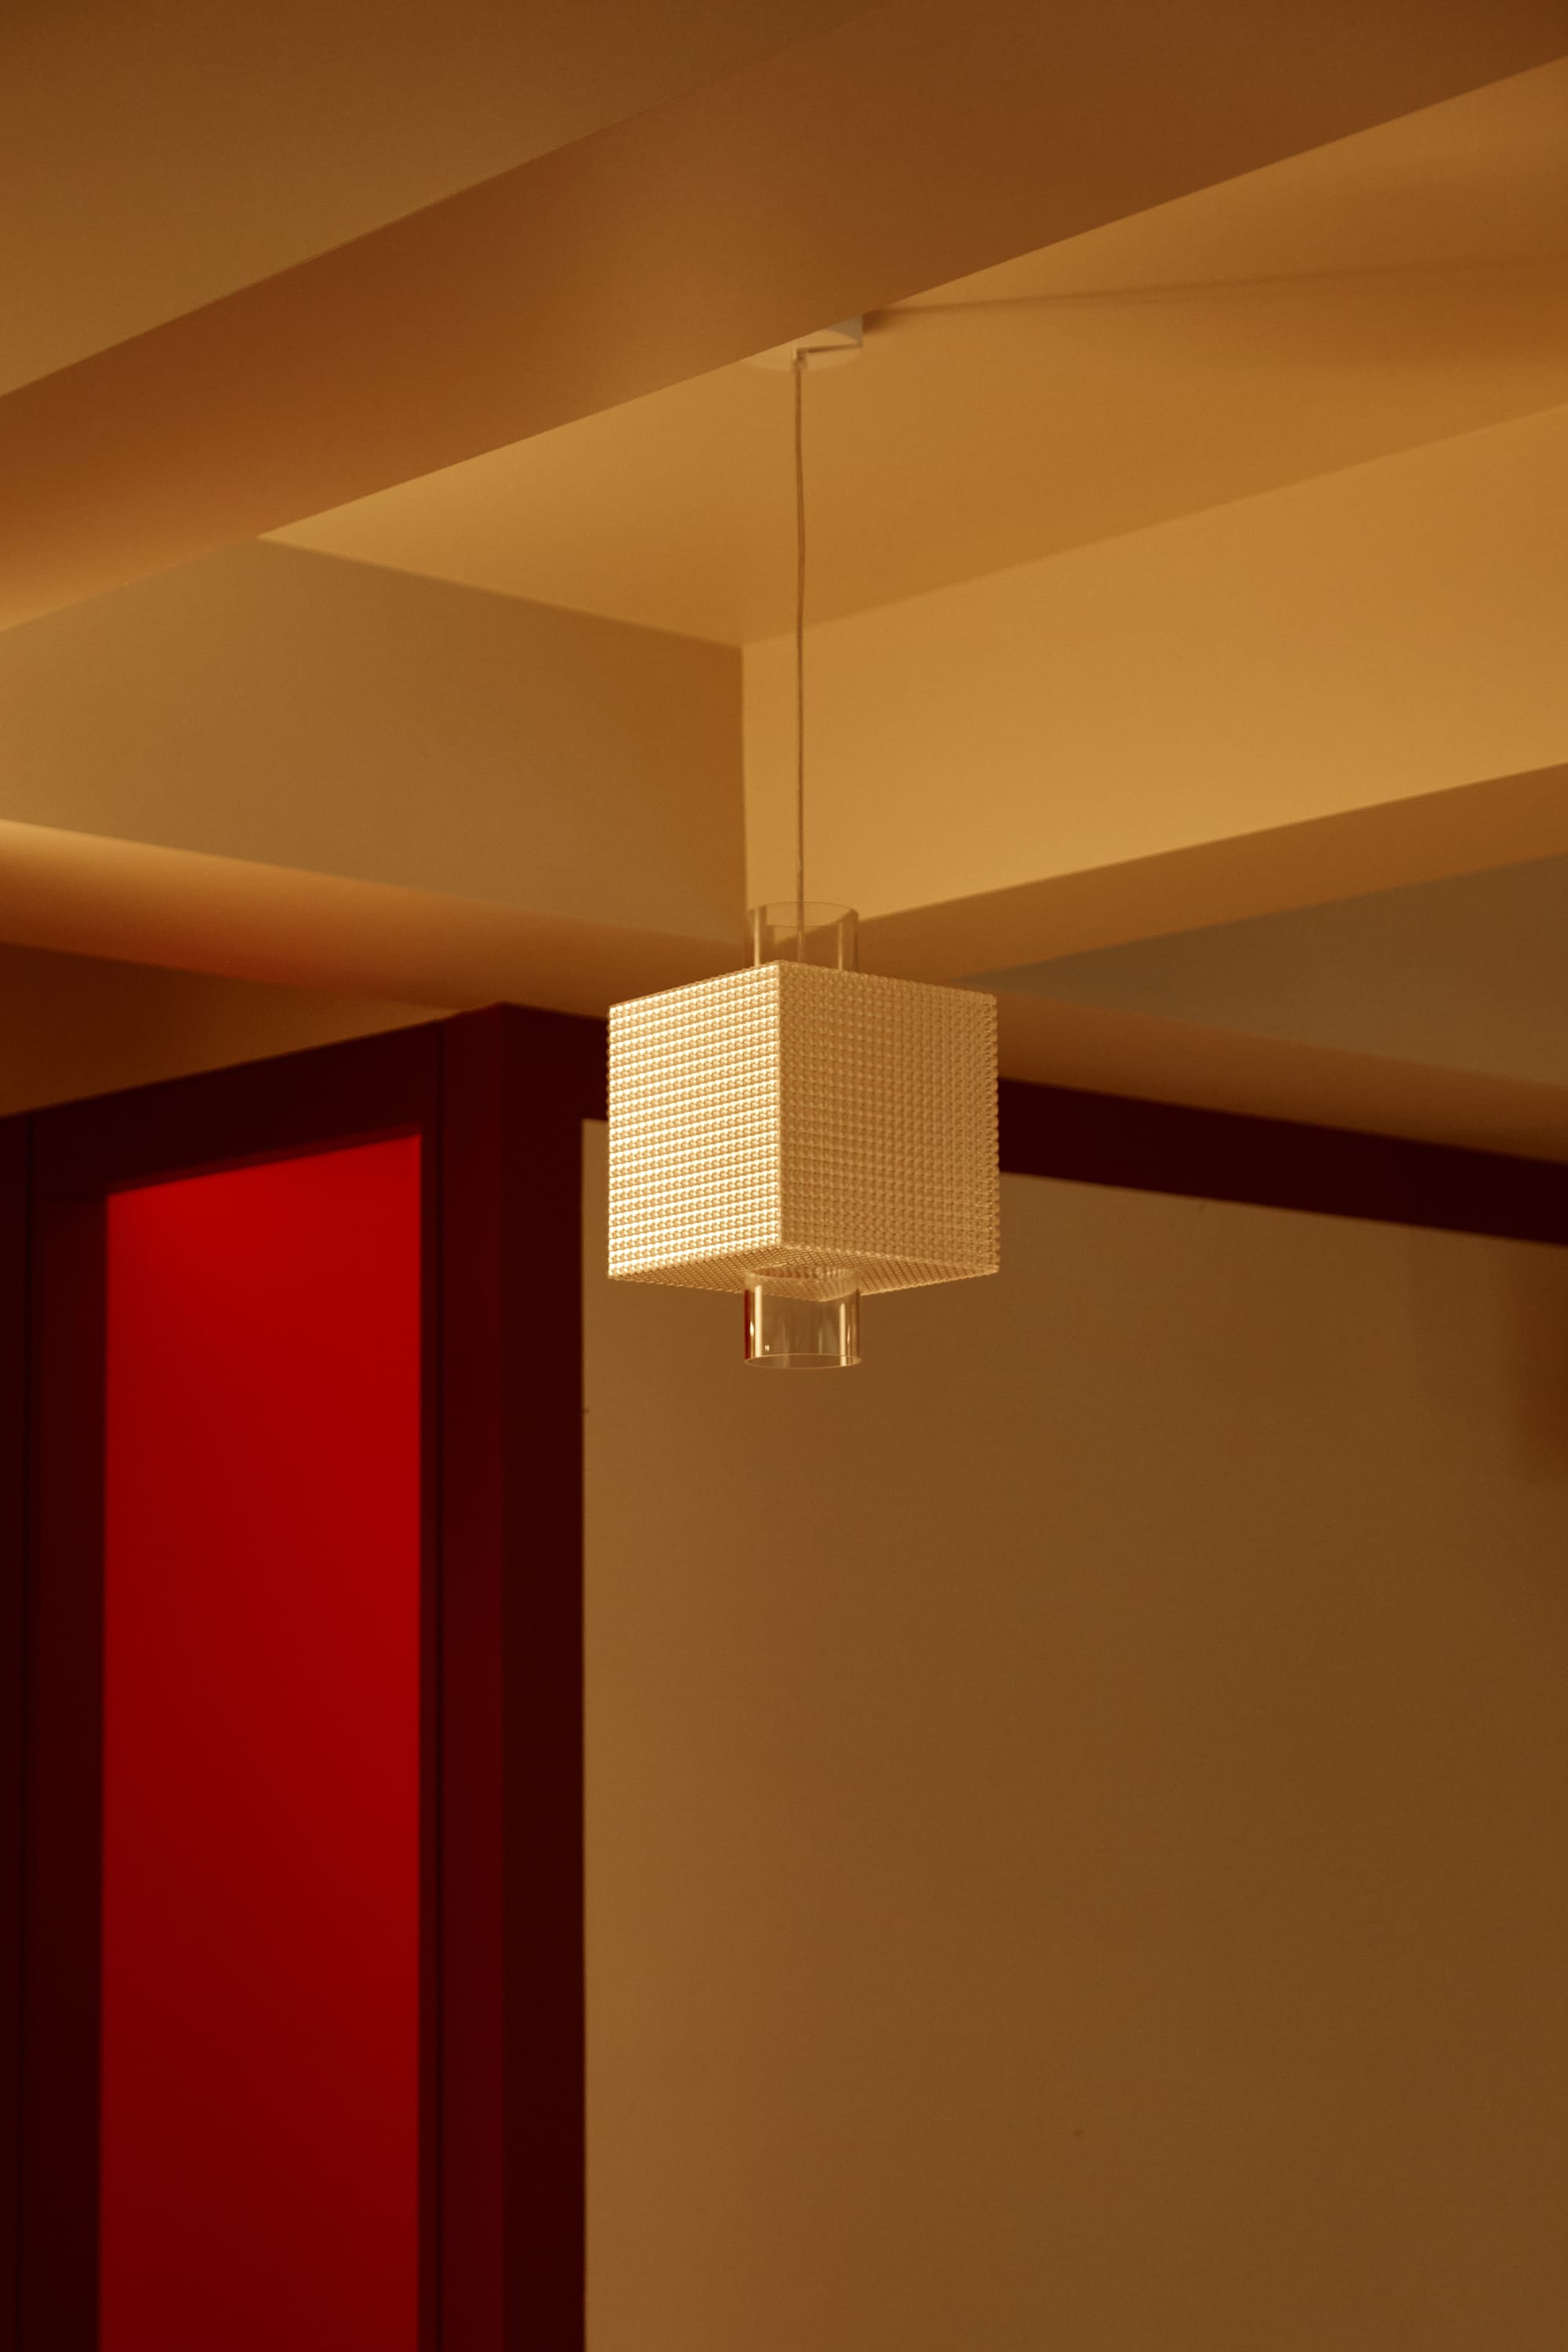 S'WICH Bondi by Studio Shand. Photography by Claudia Smith. White, square sculptural pendant light. Warm beige and red walls with brown trims. 